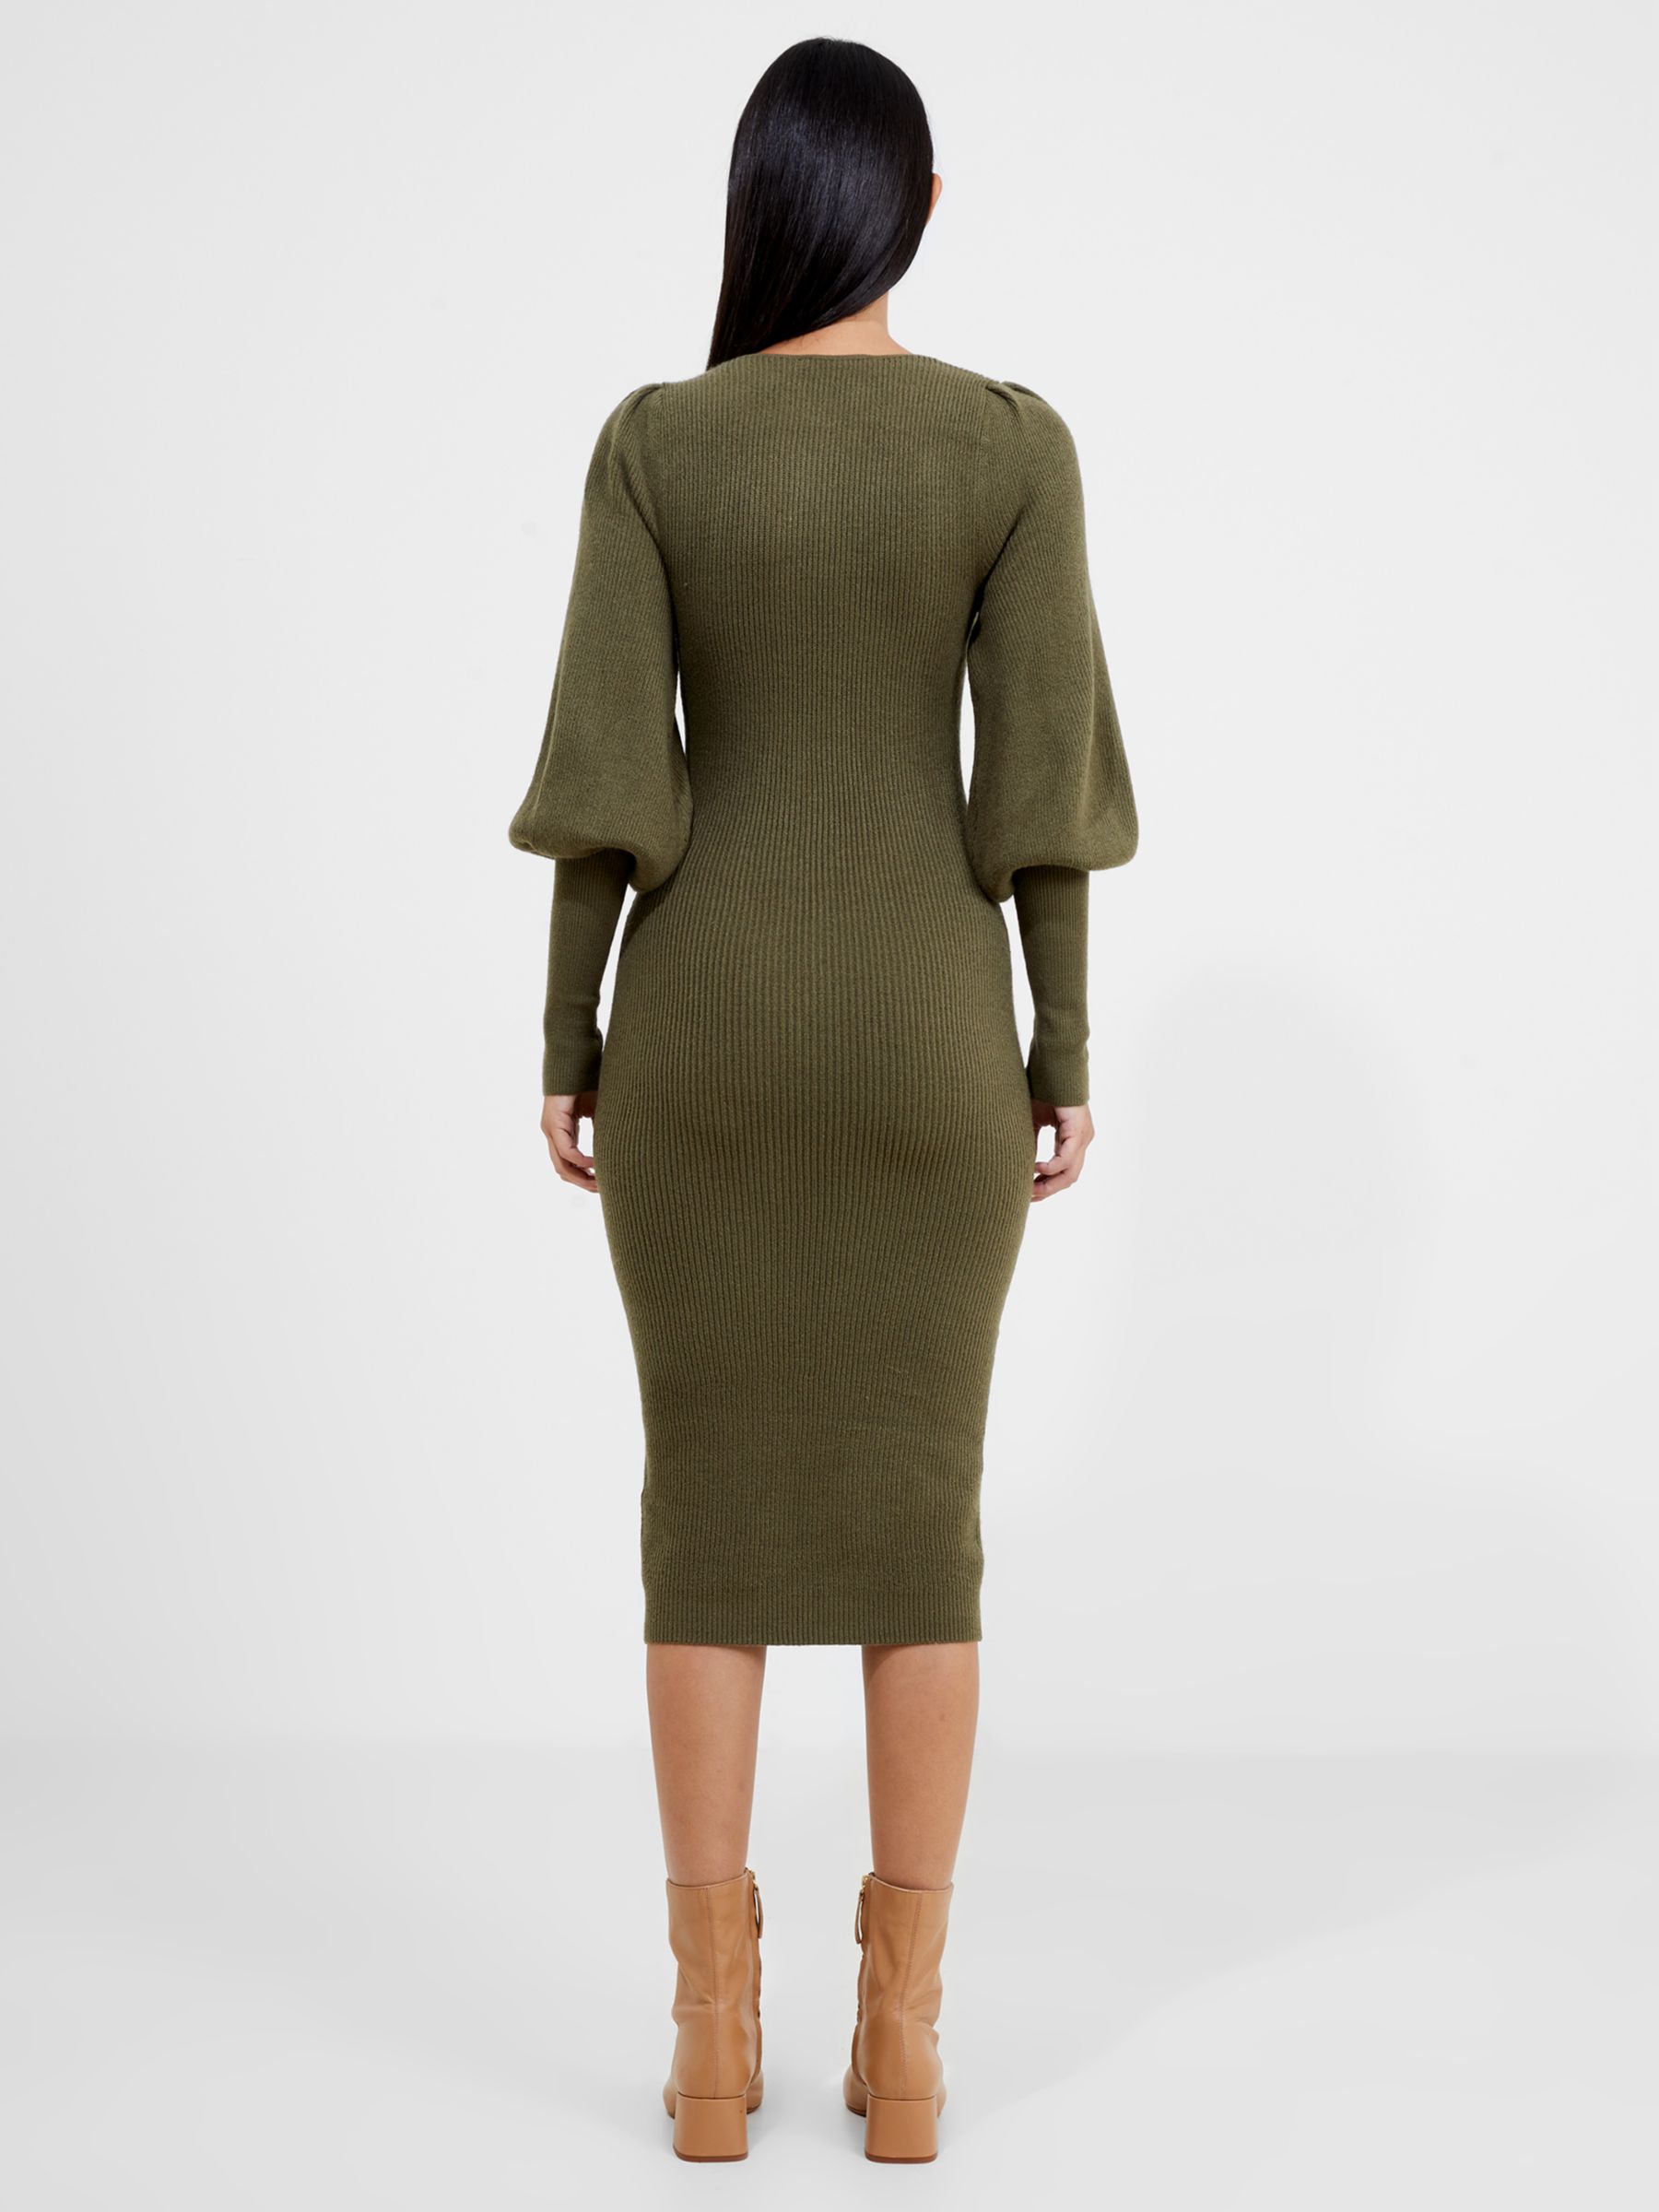 Buy French Connection Babysoft Joss Knit Dress, Olive Night Online at johnlewis.com